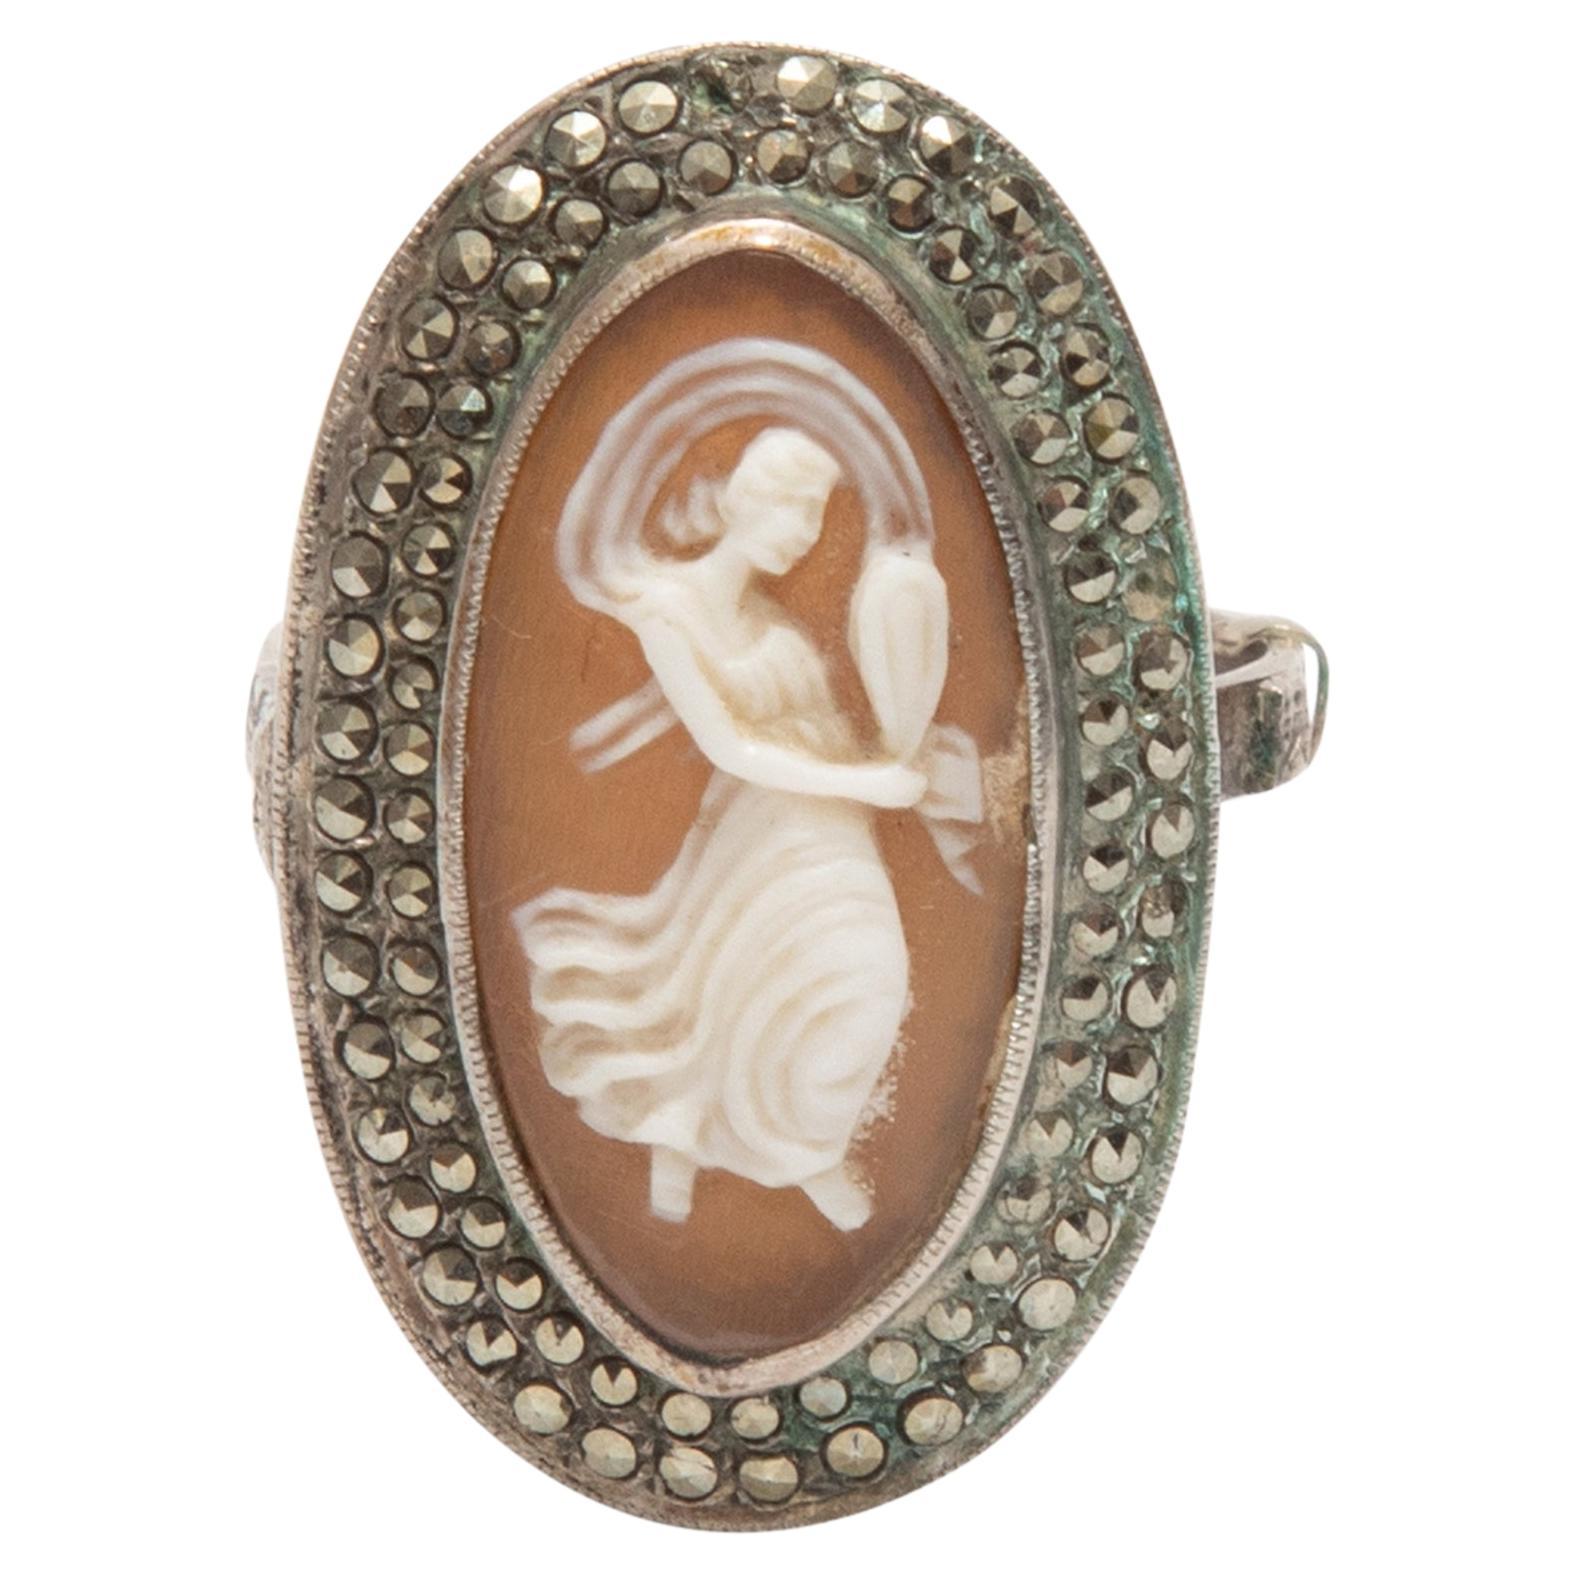 What is the meaning of a cameo ring?